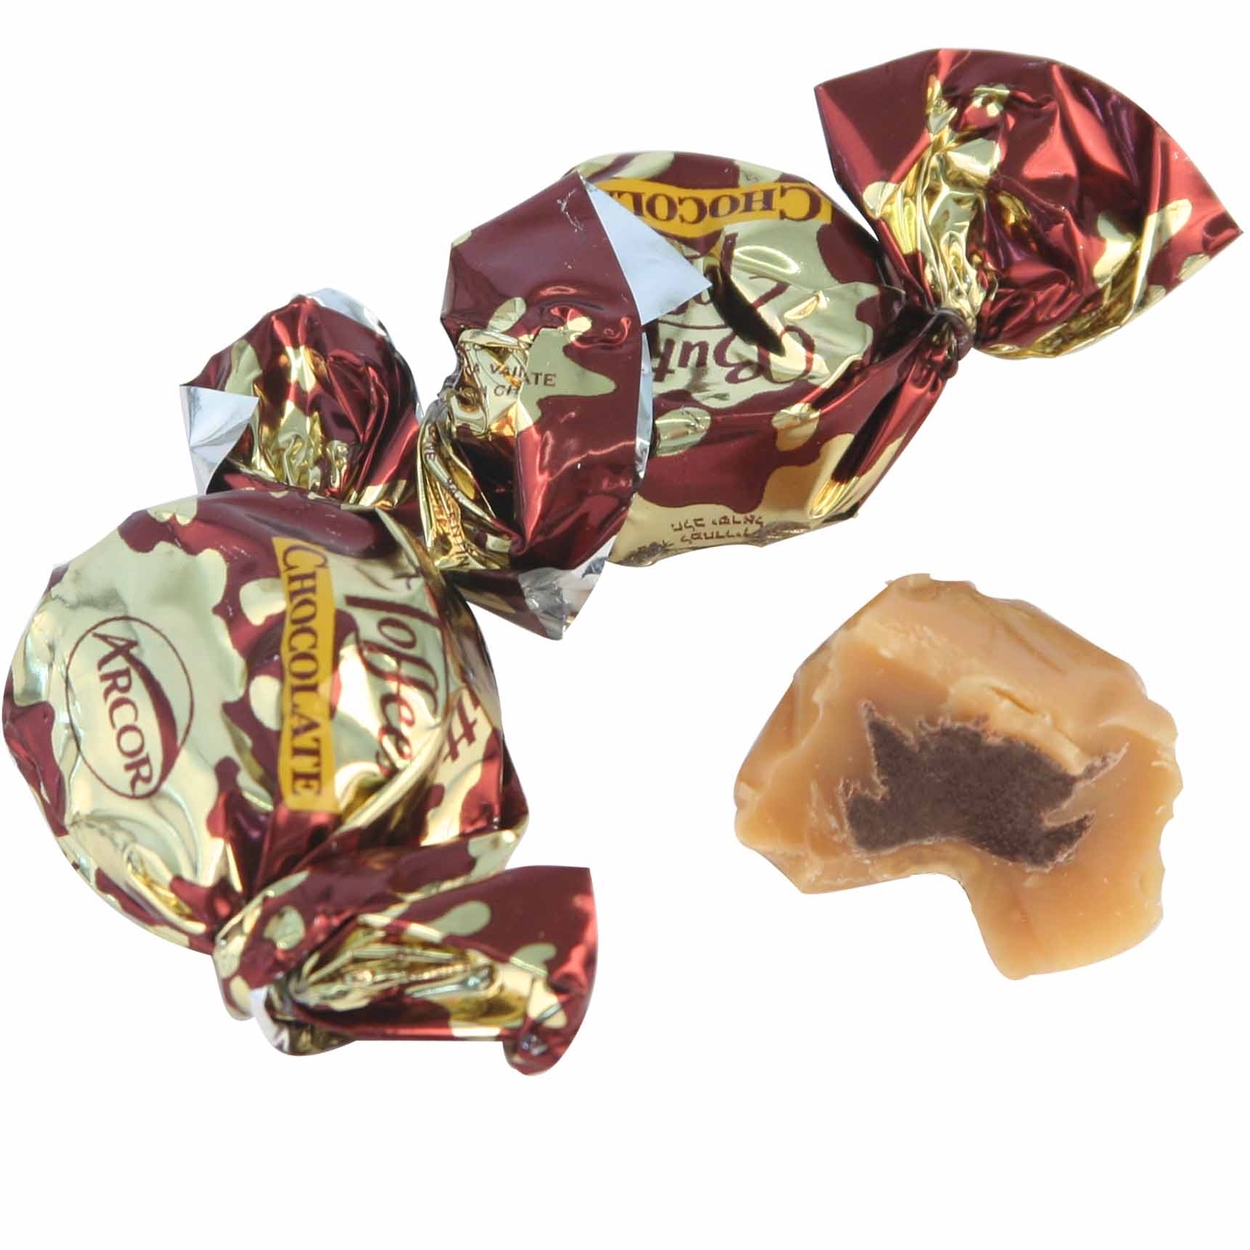 Arcor Chocolate Butter Toffee Candy - Bulk Toffee Candy • Oh! Nuts®